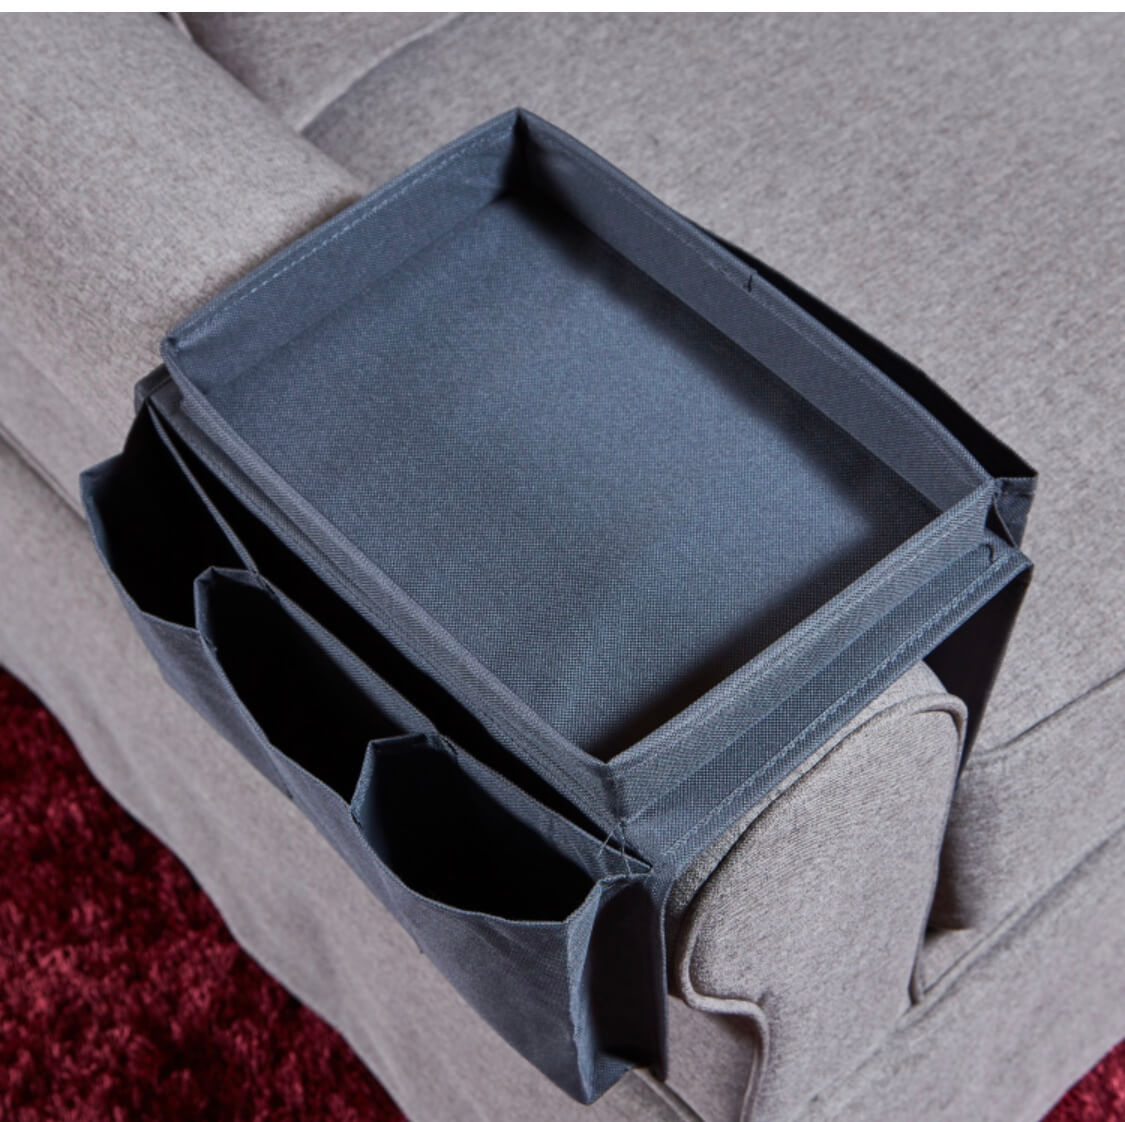 Arm Rest Remote Holder with Tray